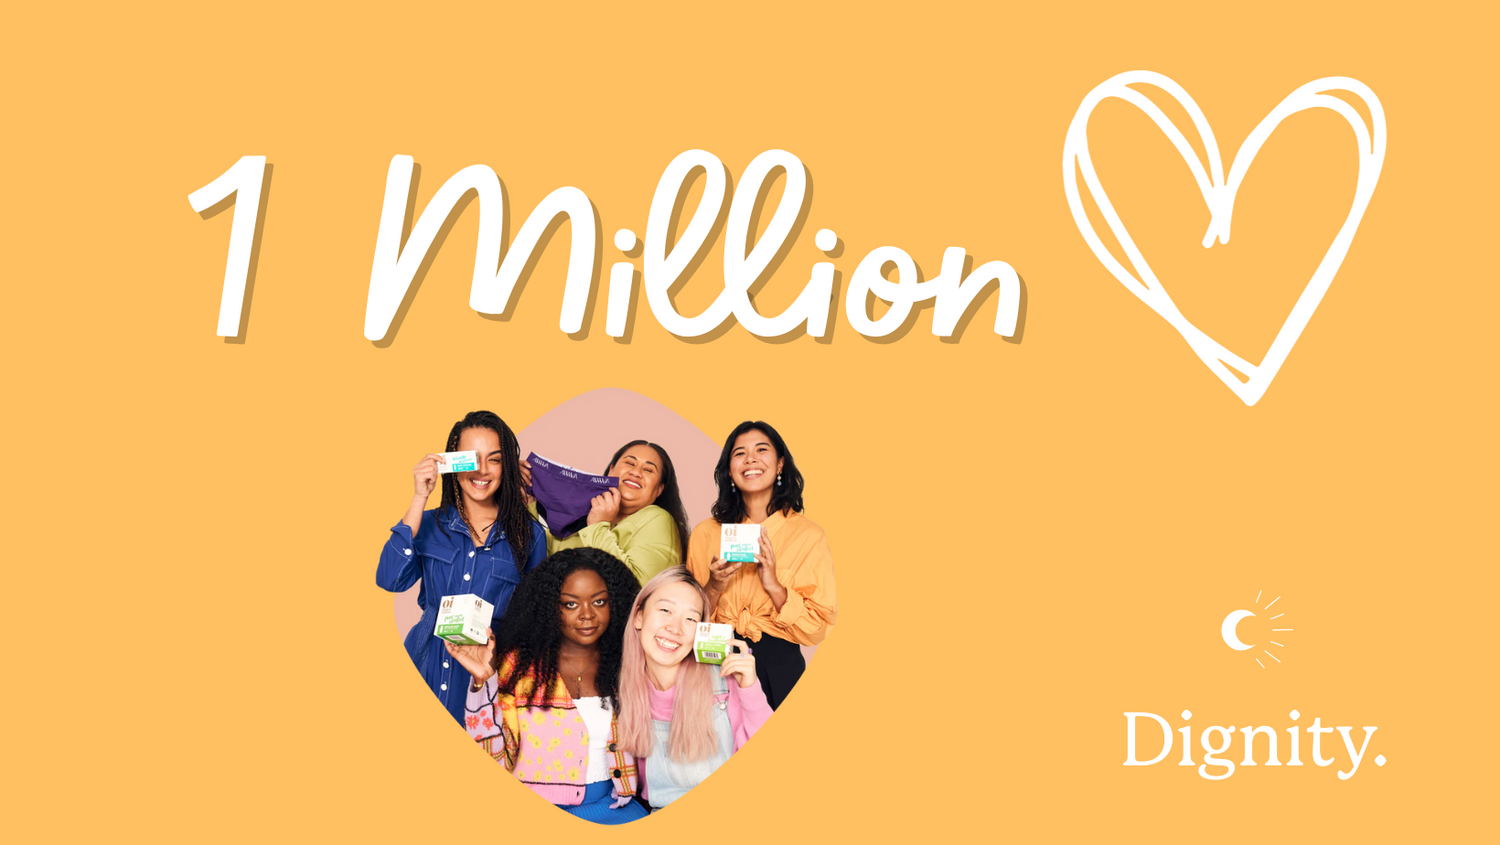 Dignity NZ Surpasses 1 Million Period Products Gifted!